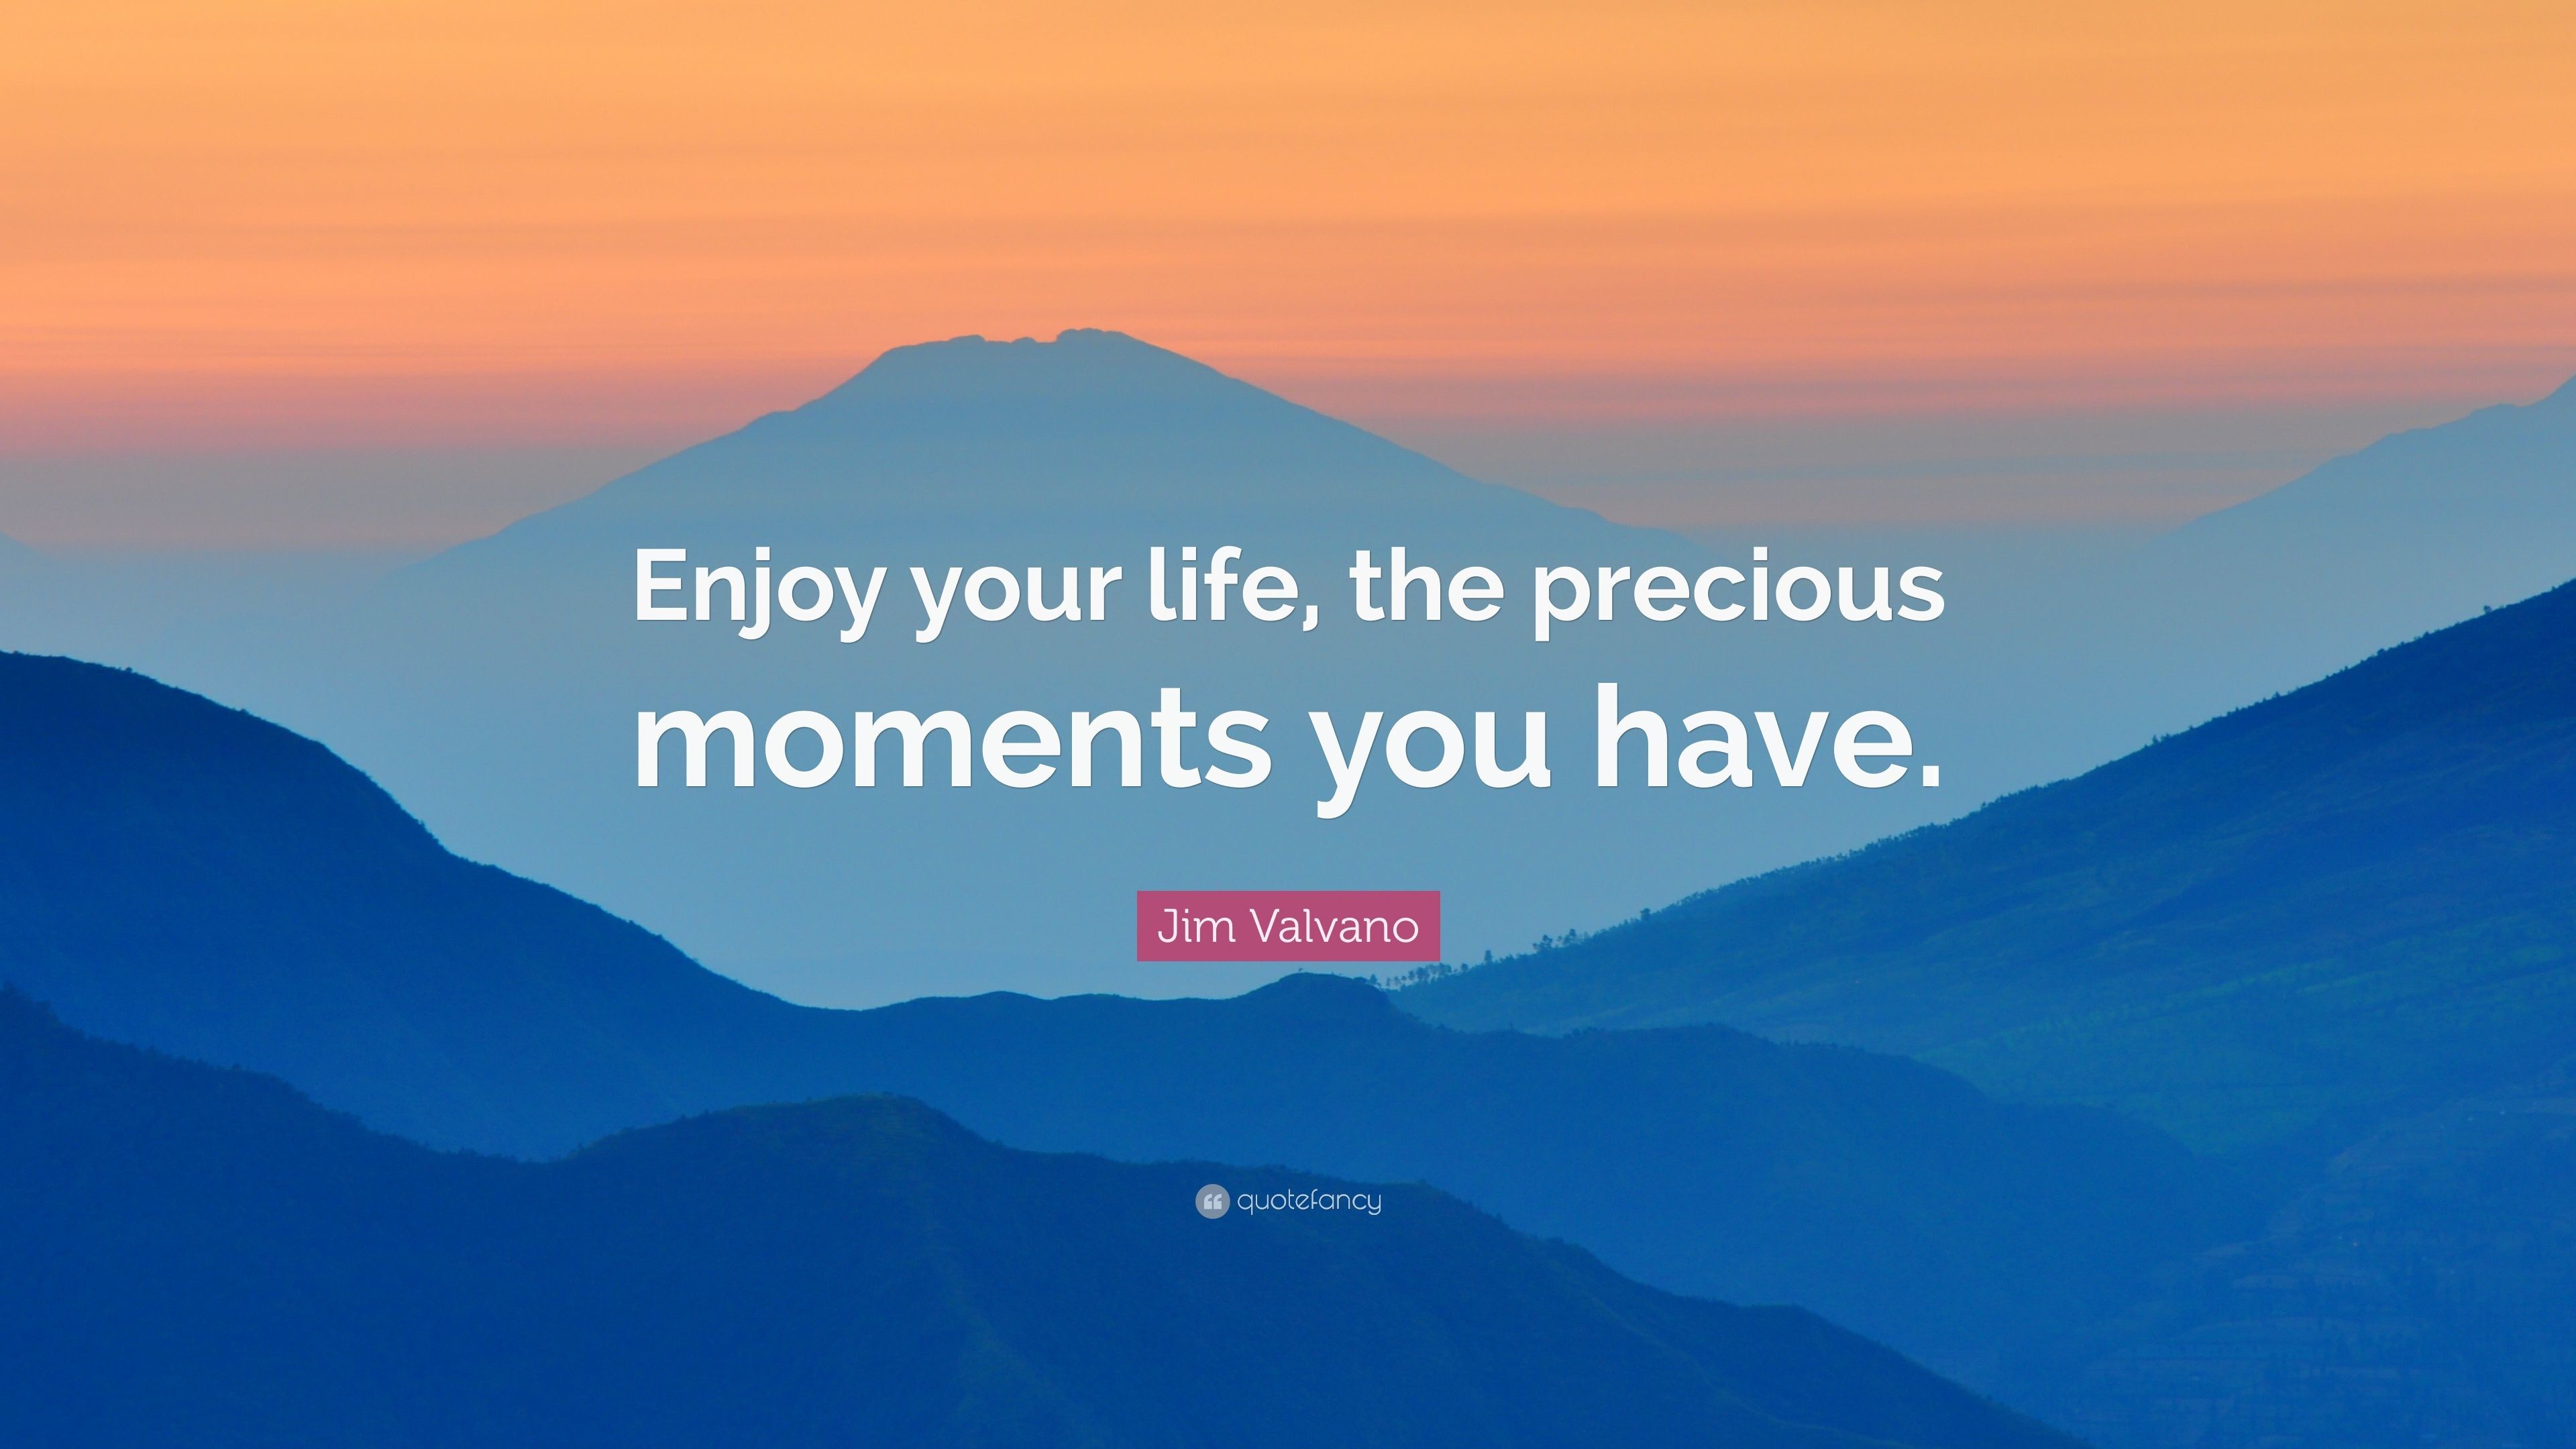 3840x2160 Jim Valvano Quote: “Enjoy your life, the precious moments you have.”